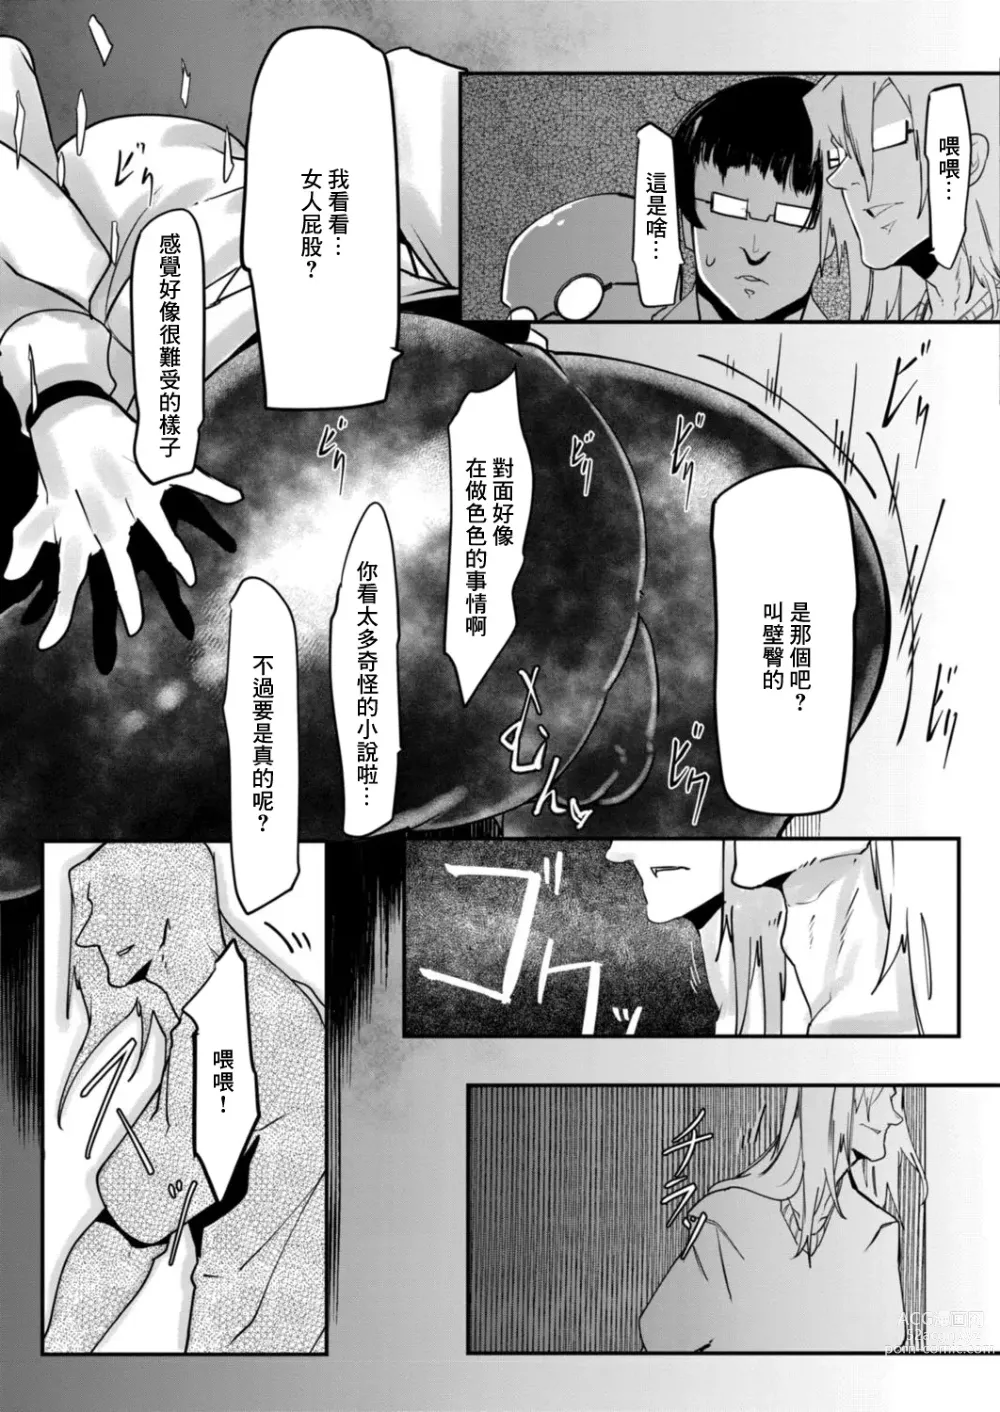 Page 7 of manga HERO DAY TIME Ch. 6